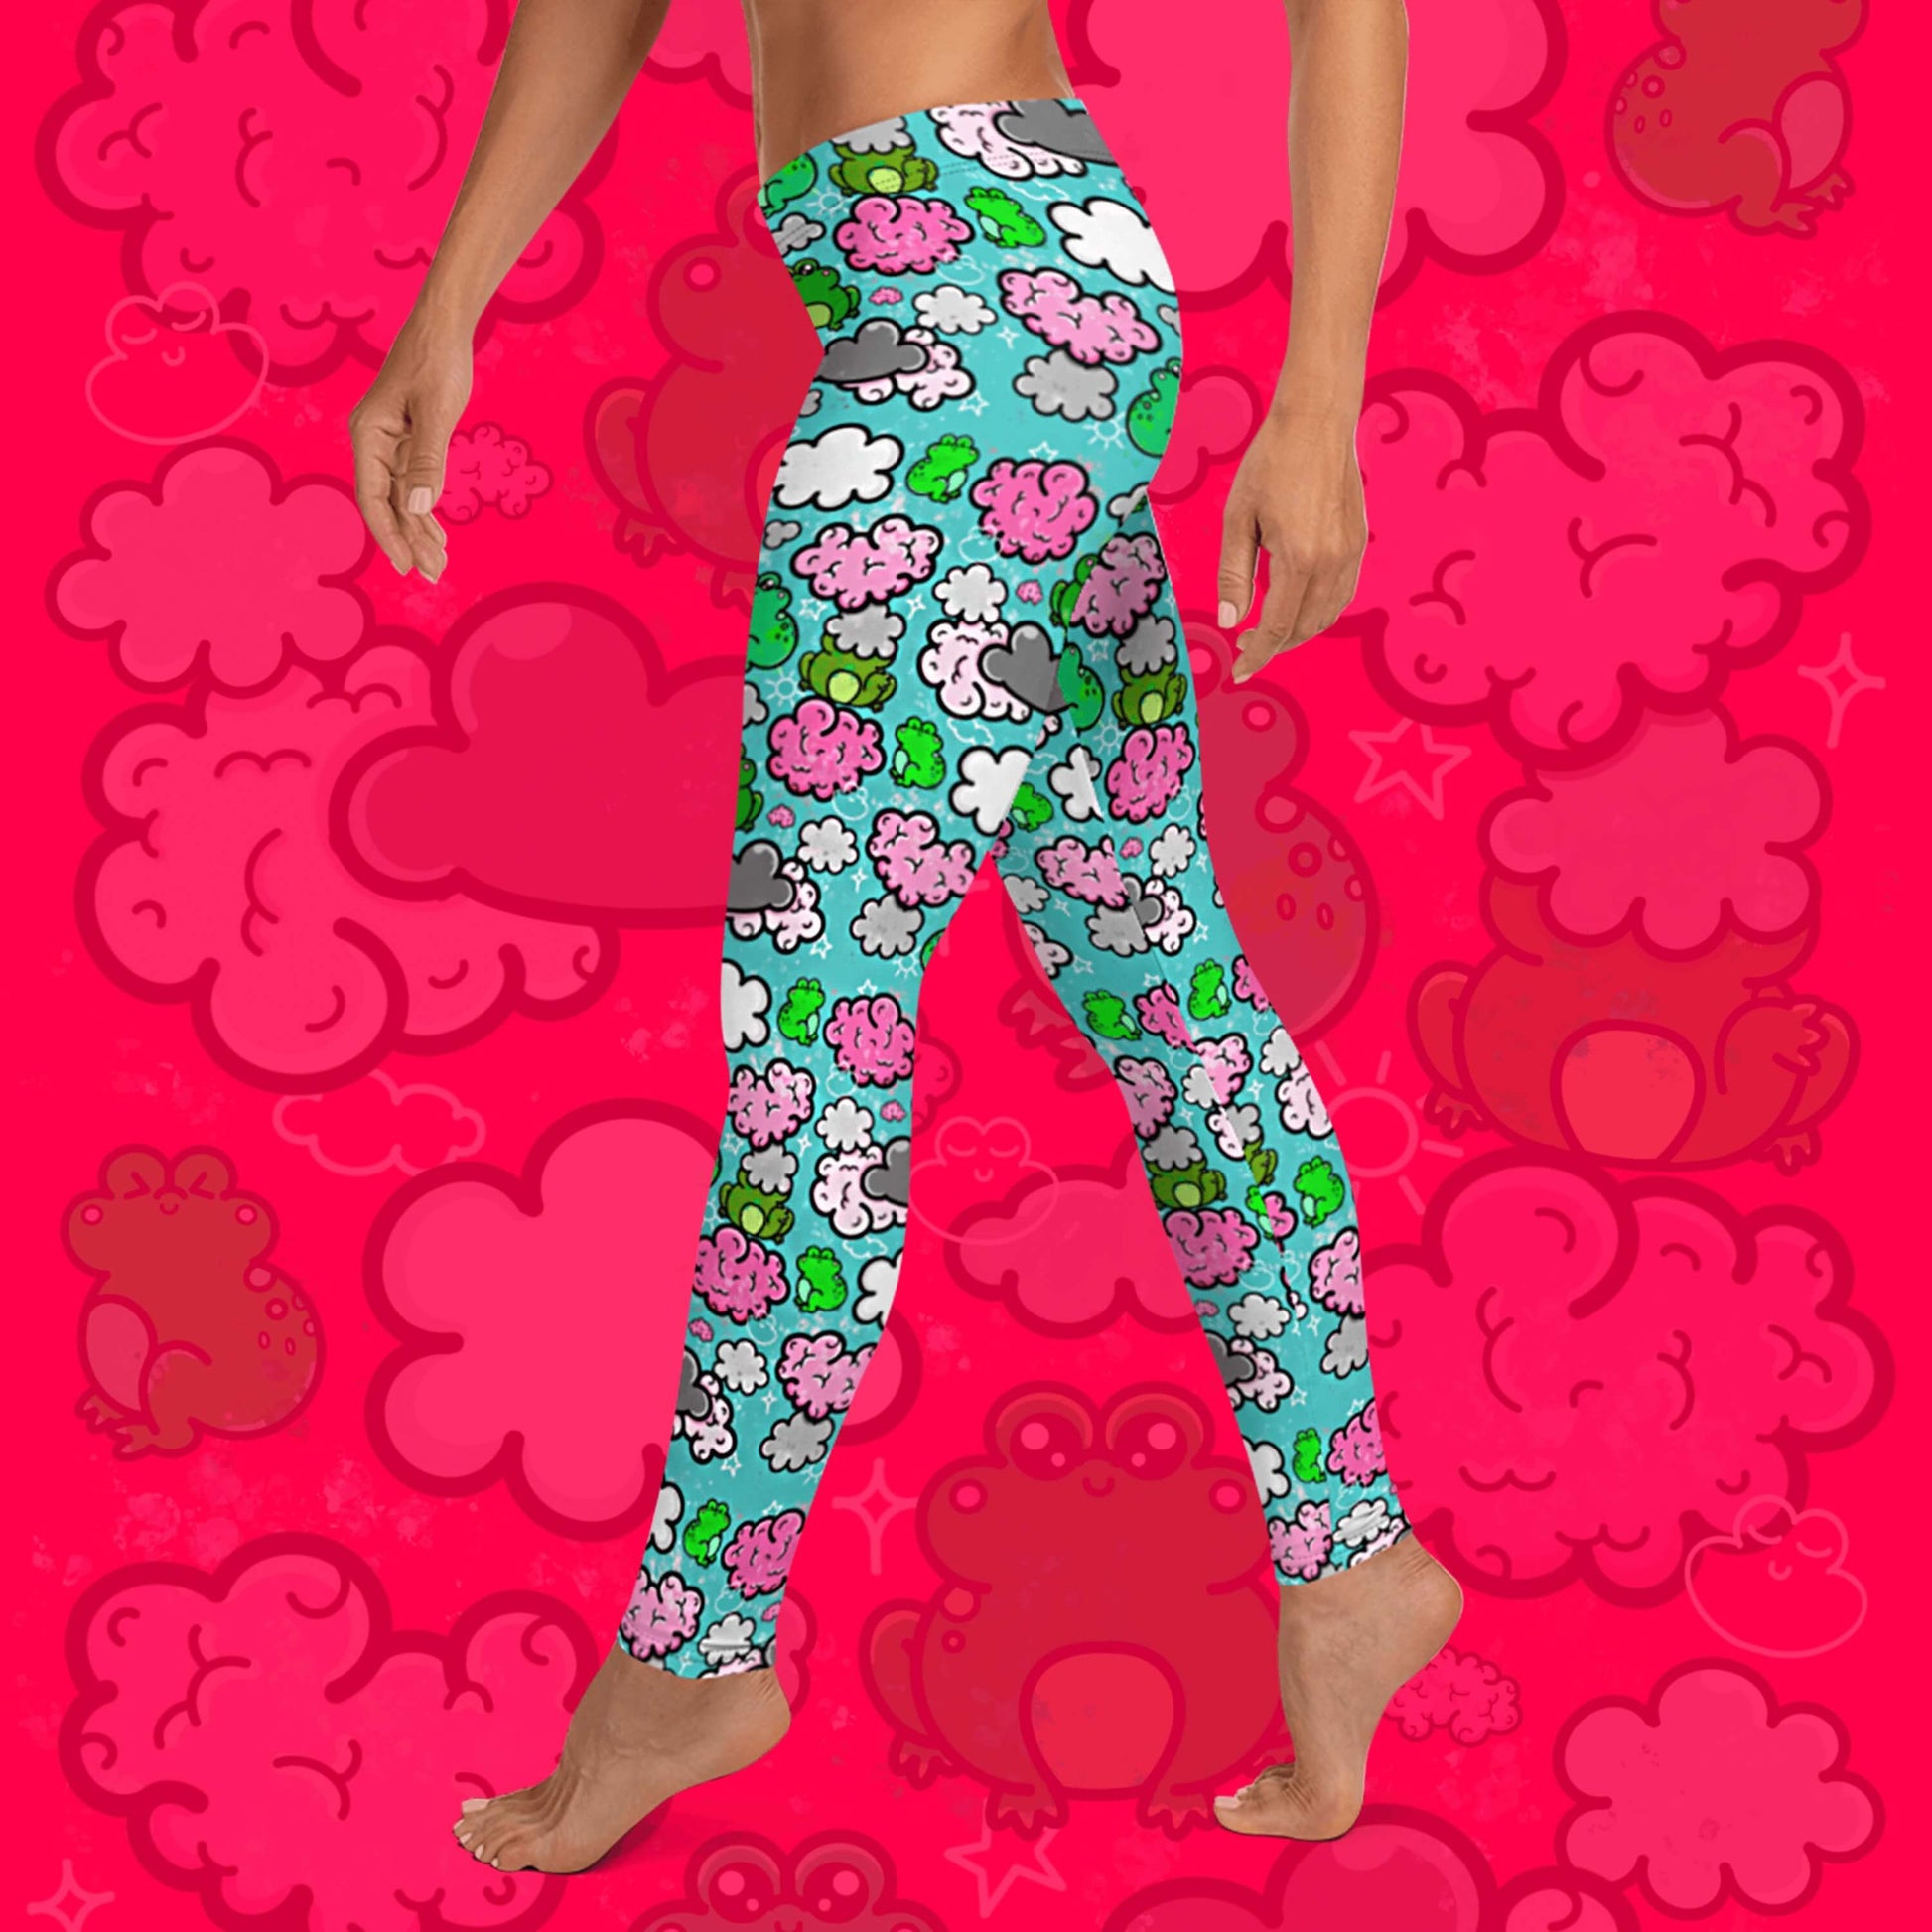 The Brain Frog Leggings - Brain Fog being worn by a model walking left on a red background with a faded brain frog print, the photo is cropped from the hips down. The leggings are an aqua blue base with various green kawaii face frogs with pink blush cheeks, pink brain style clouds, white and grey clouds and white sparkles all over. The design was created to raise awareness of Brain Fog.